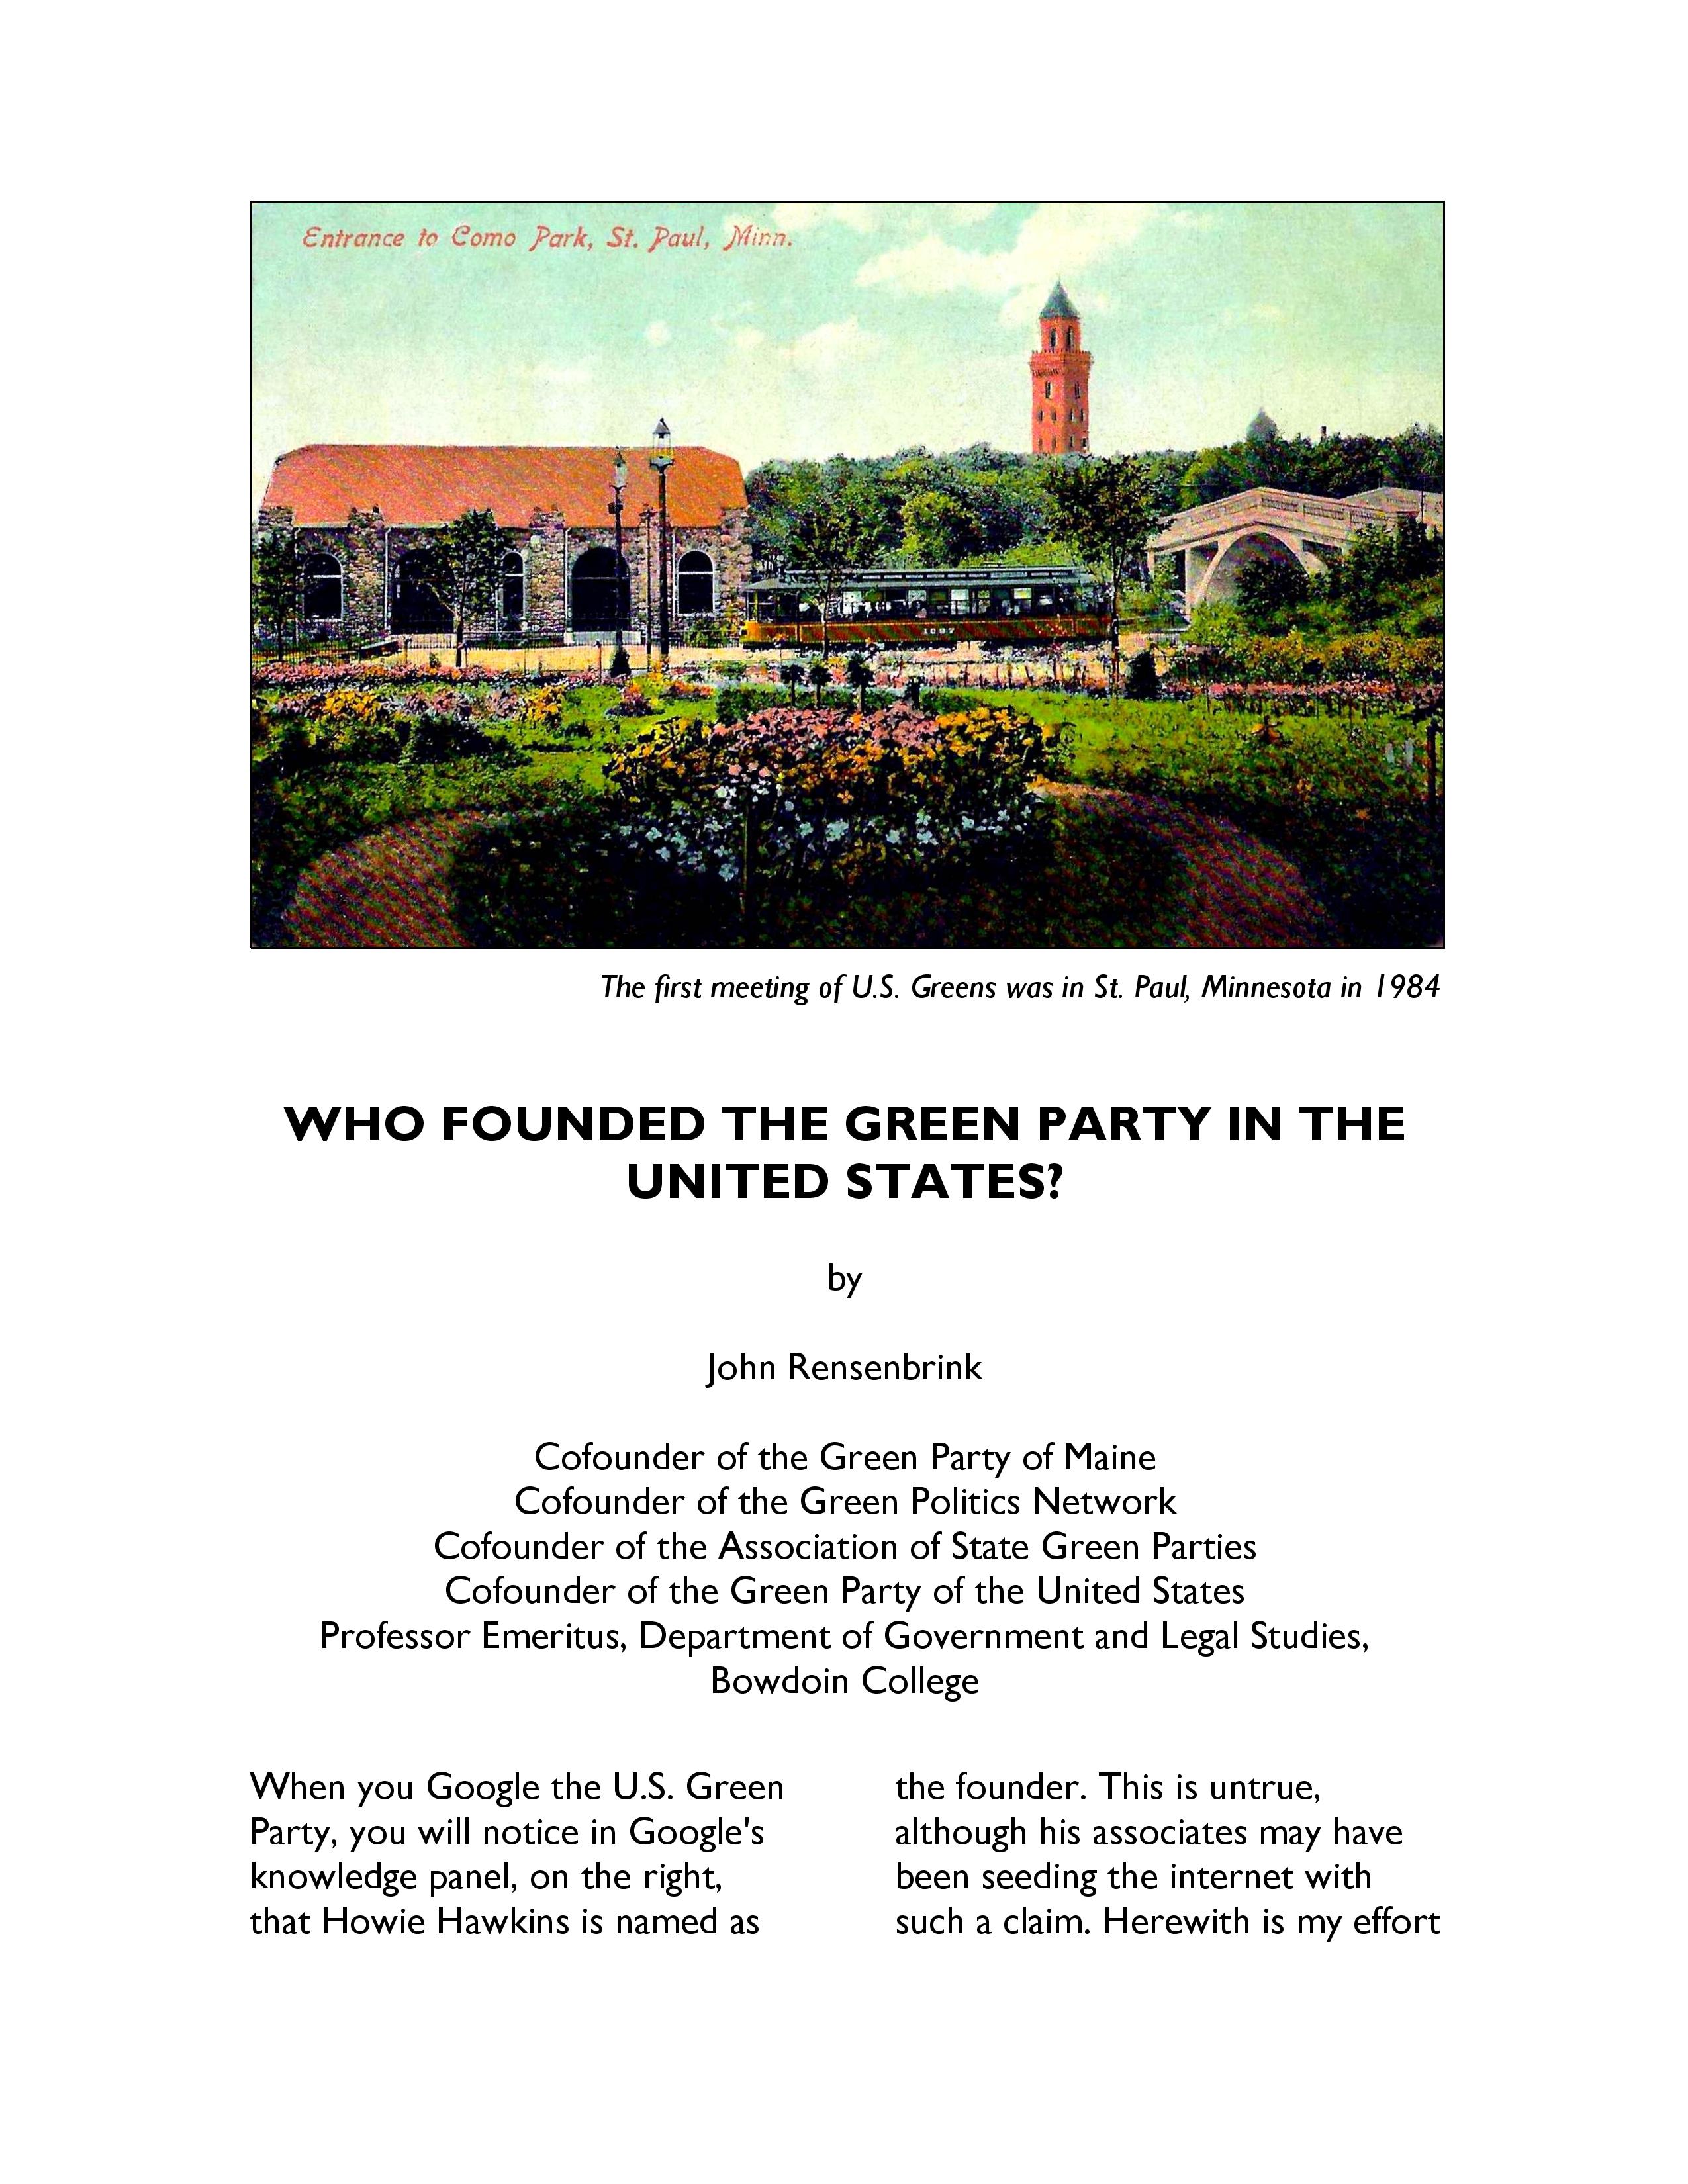 WHO FOUNDED THE GREEN PARTY IN THE UNITED STATES page 001